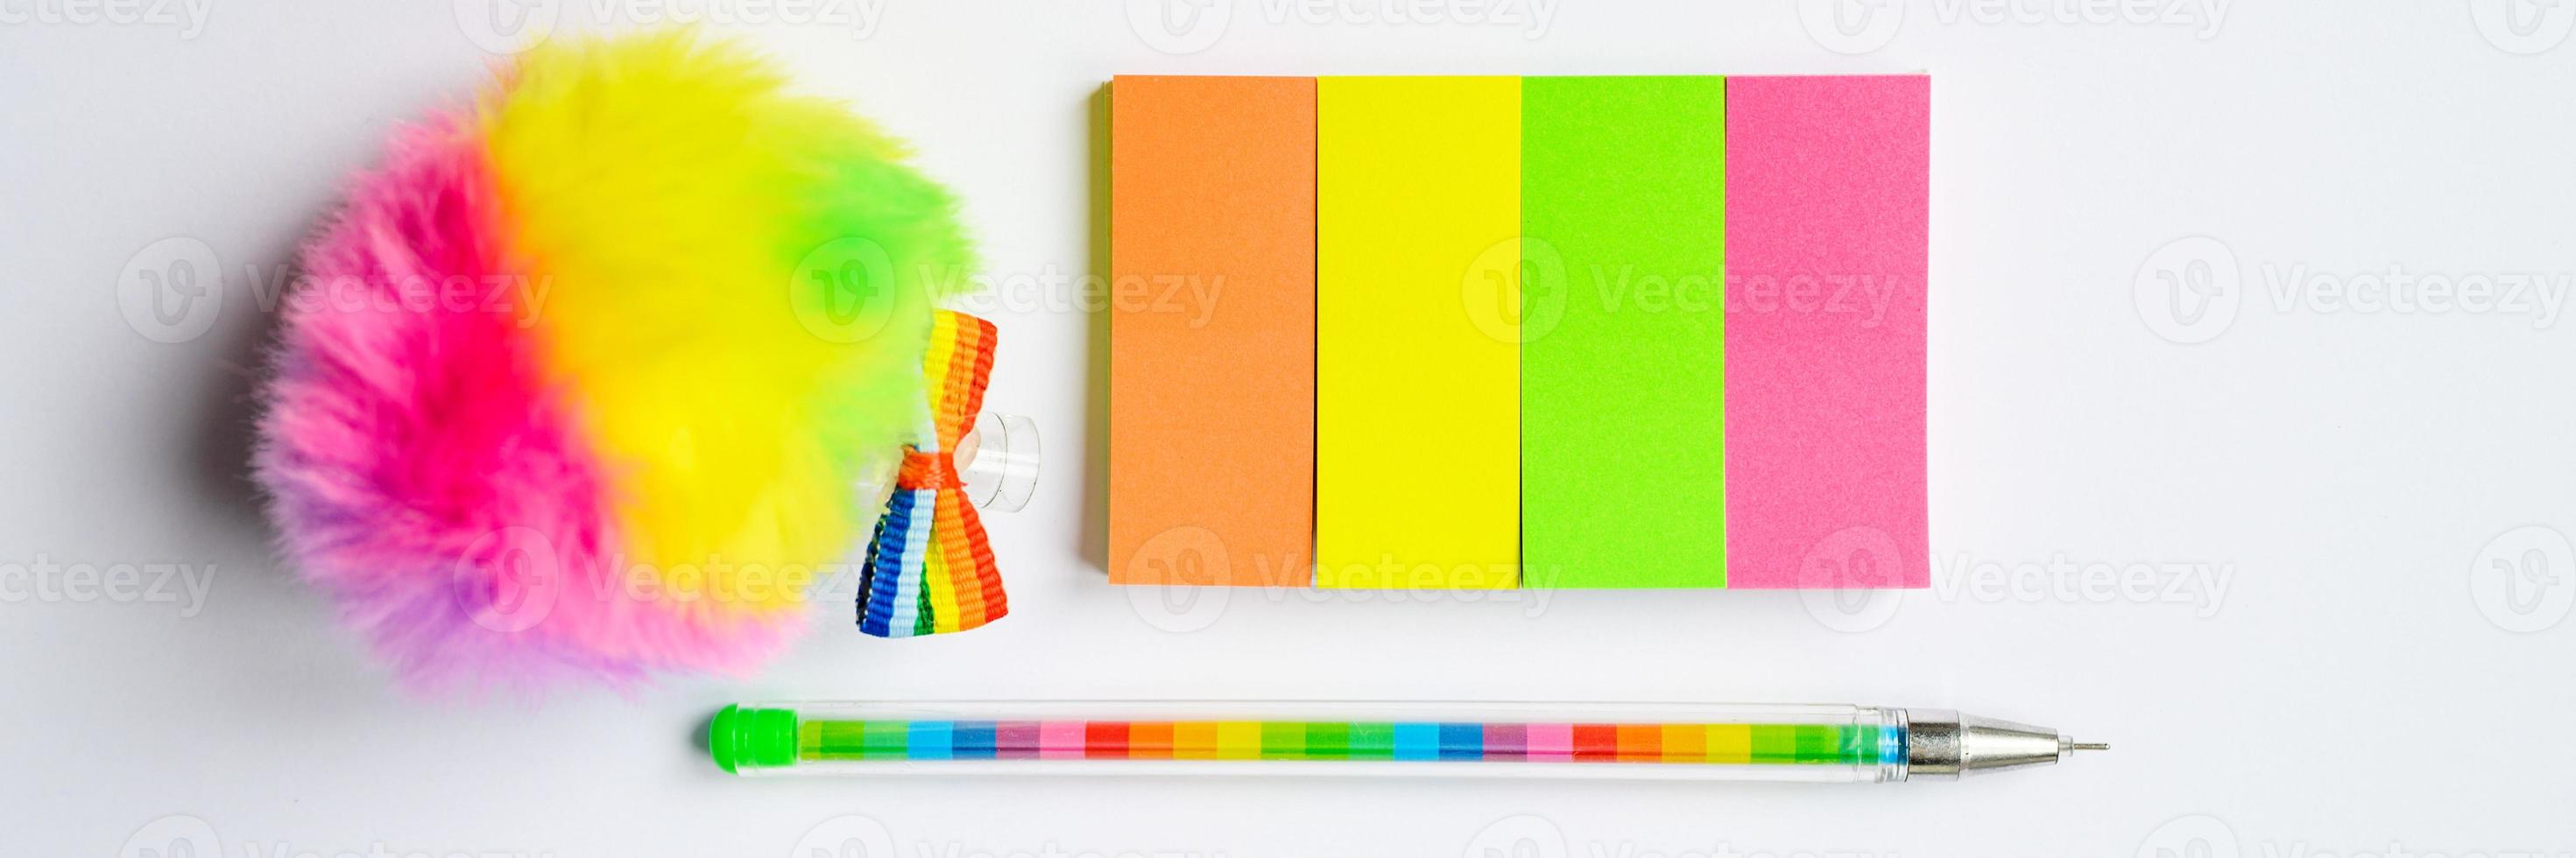 Multi-colored stickers and a pen on white background photo